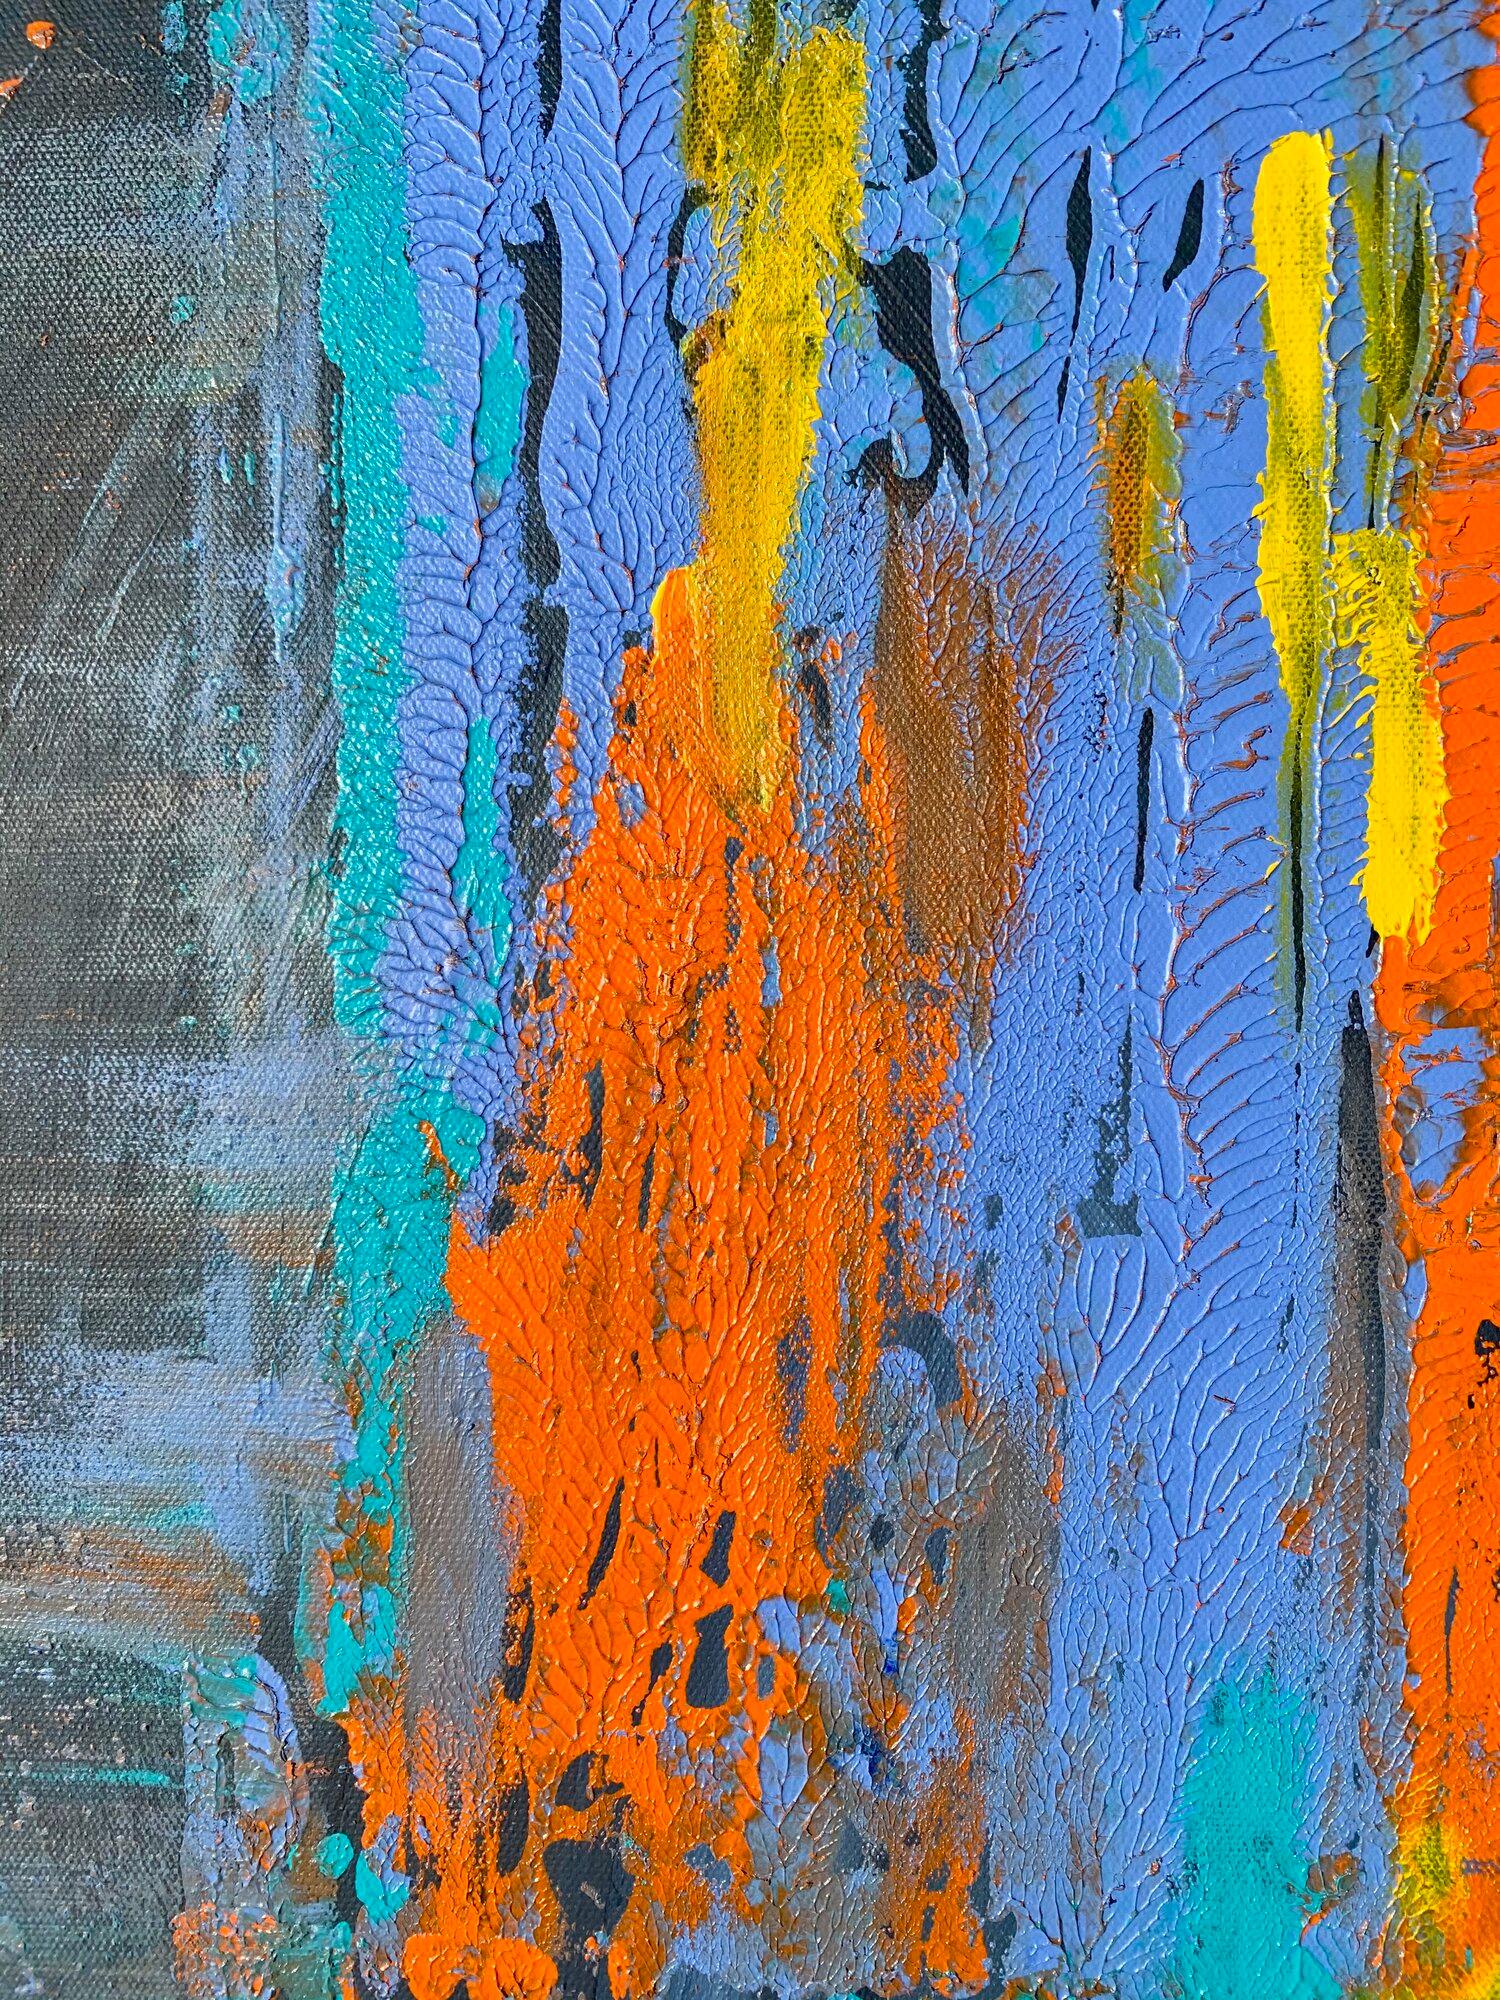 Waking Up, Original Abstract Painting, 2021 For Sale 1